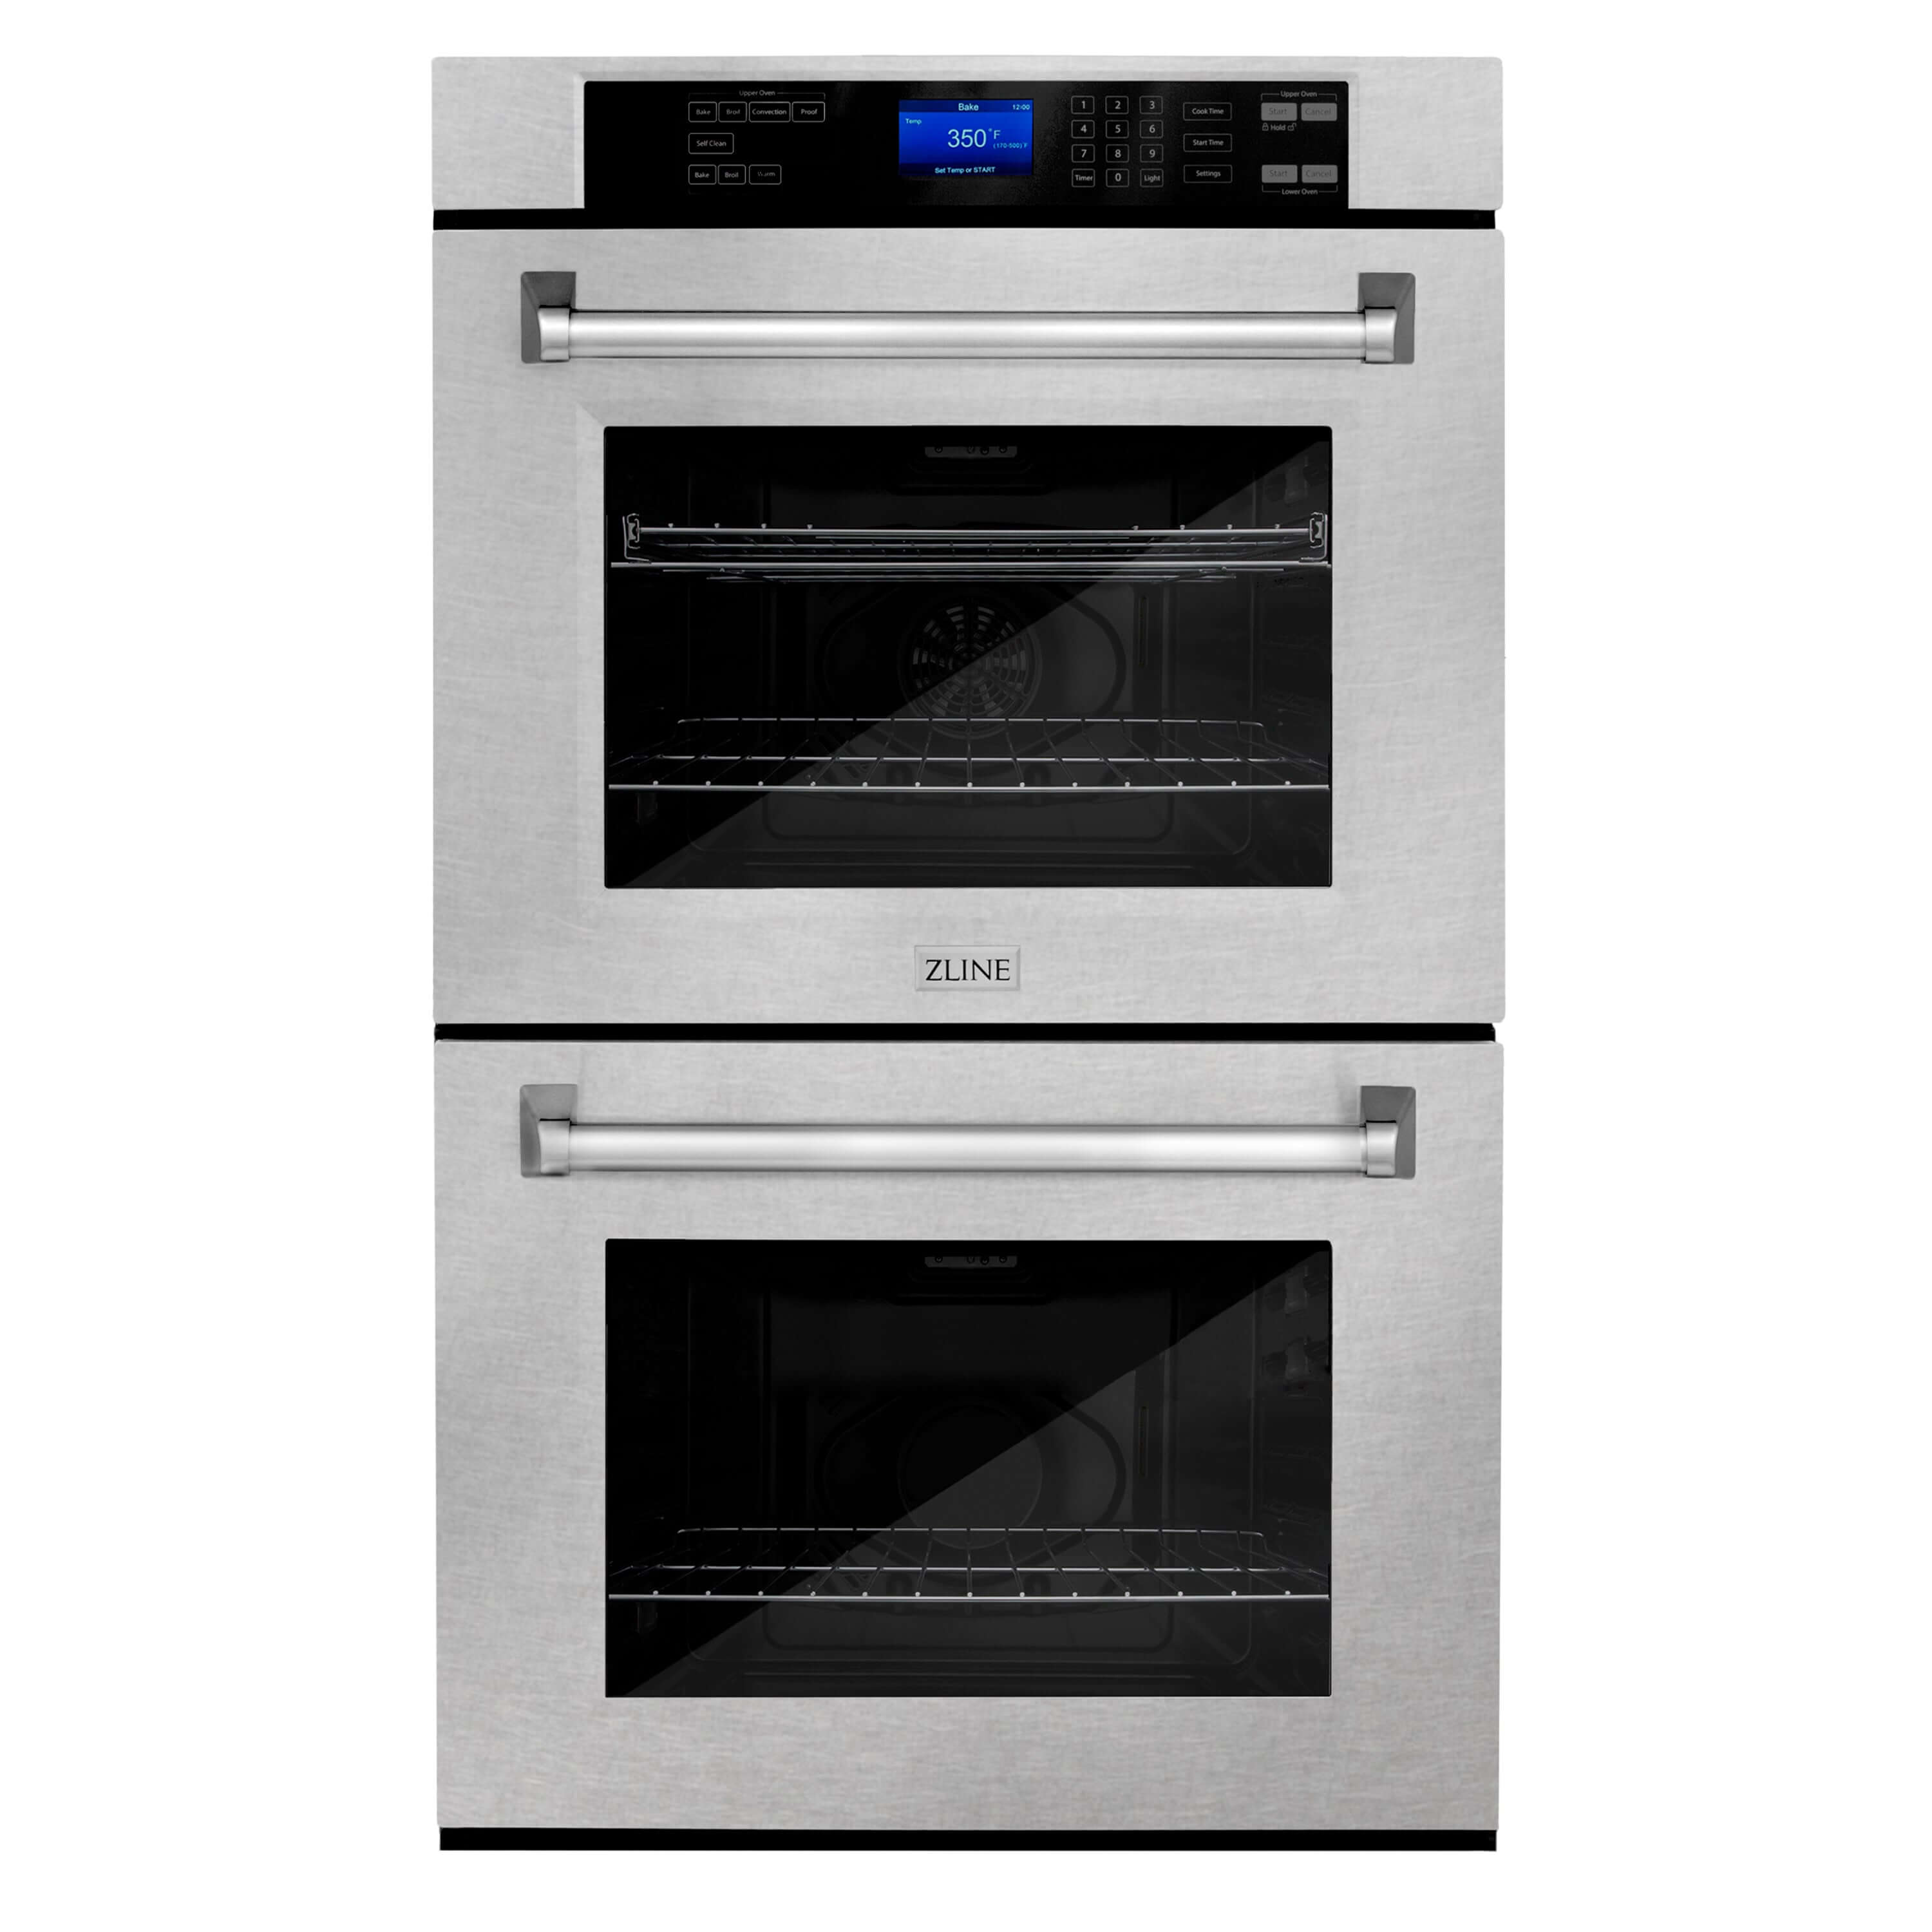 ZLINE 30 in. Professional Electric Double Wall Oven with Self Clean and True Convection in Fingerprint Resistant Stainless Steel (AWDS-30) front, oven closed.